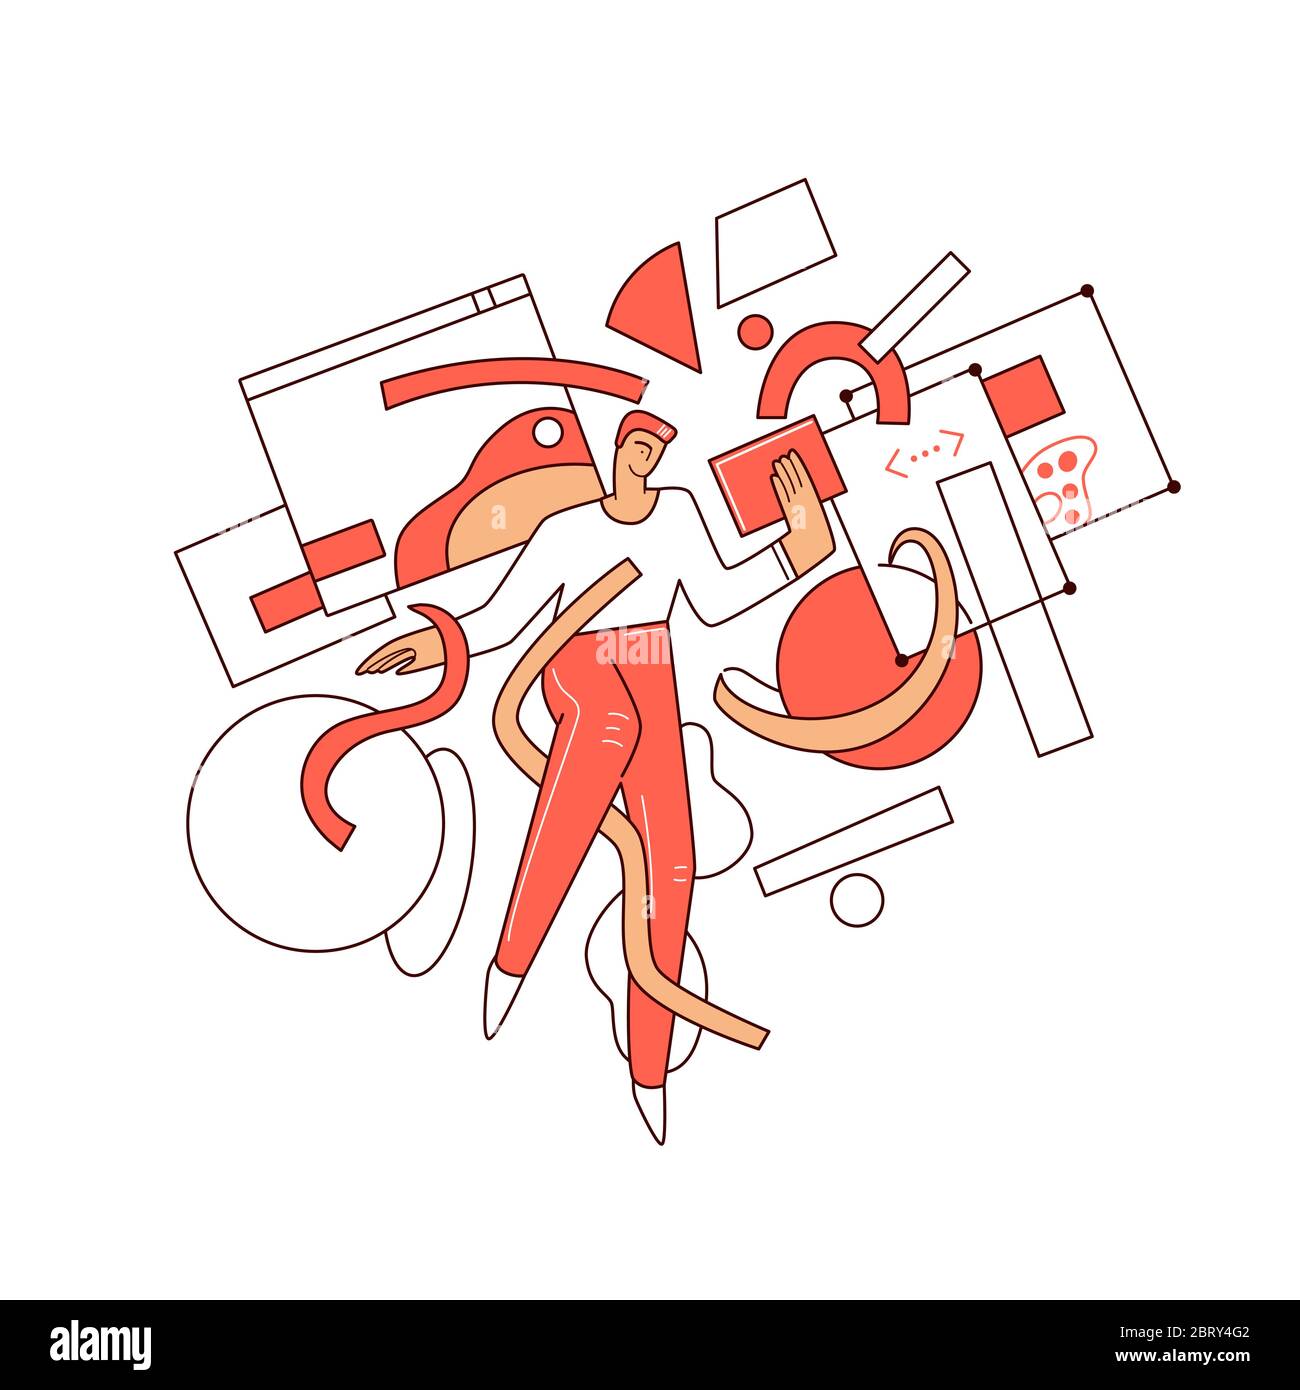 Online education vector flat concept - Man character flying around abstract educational elements, web app, video course in computer, science, art Stock Vector